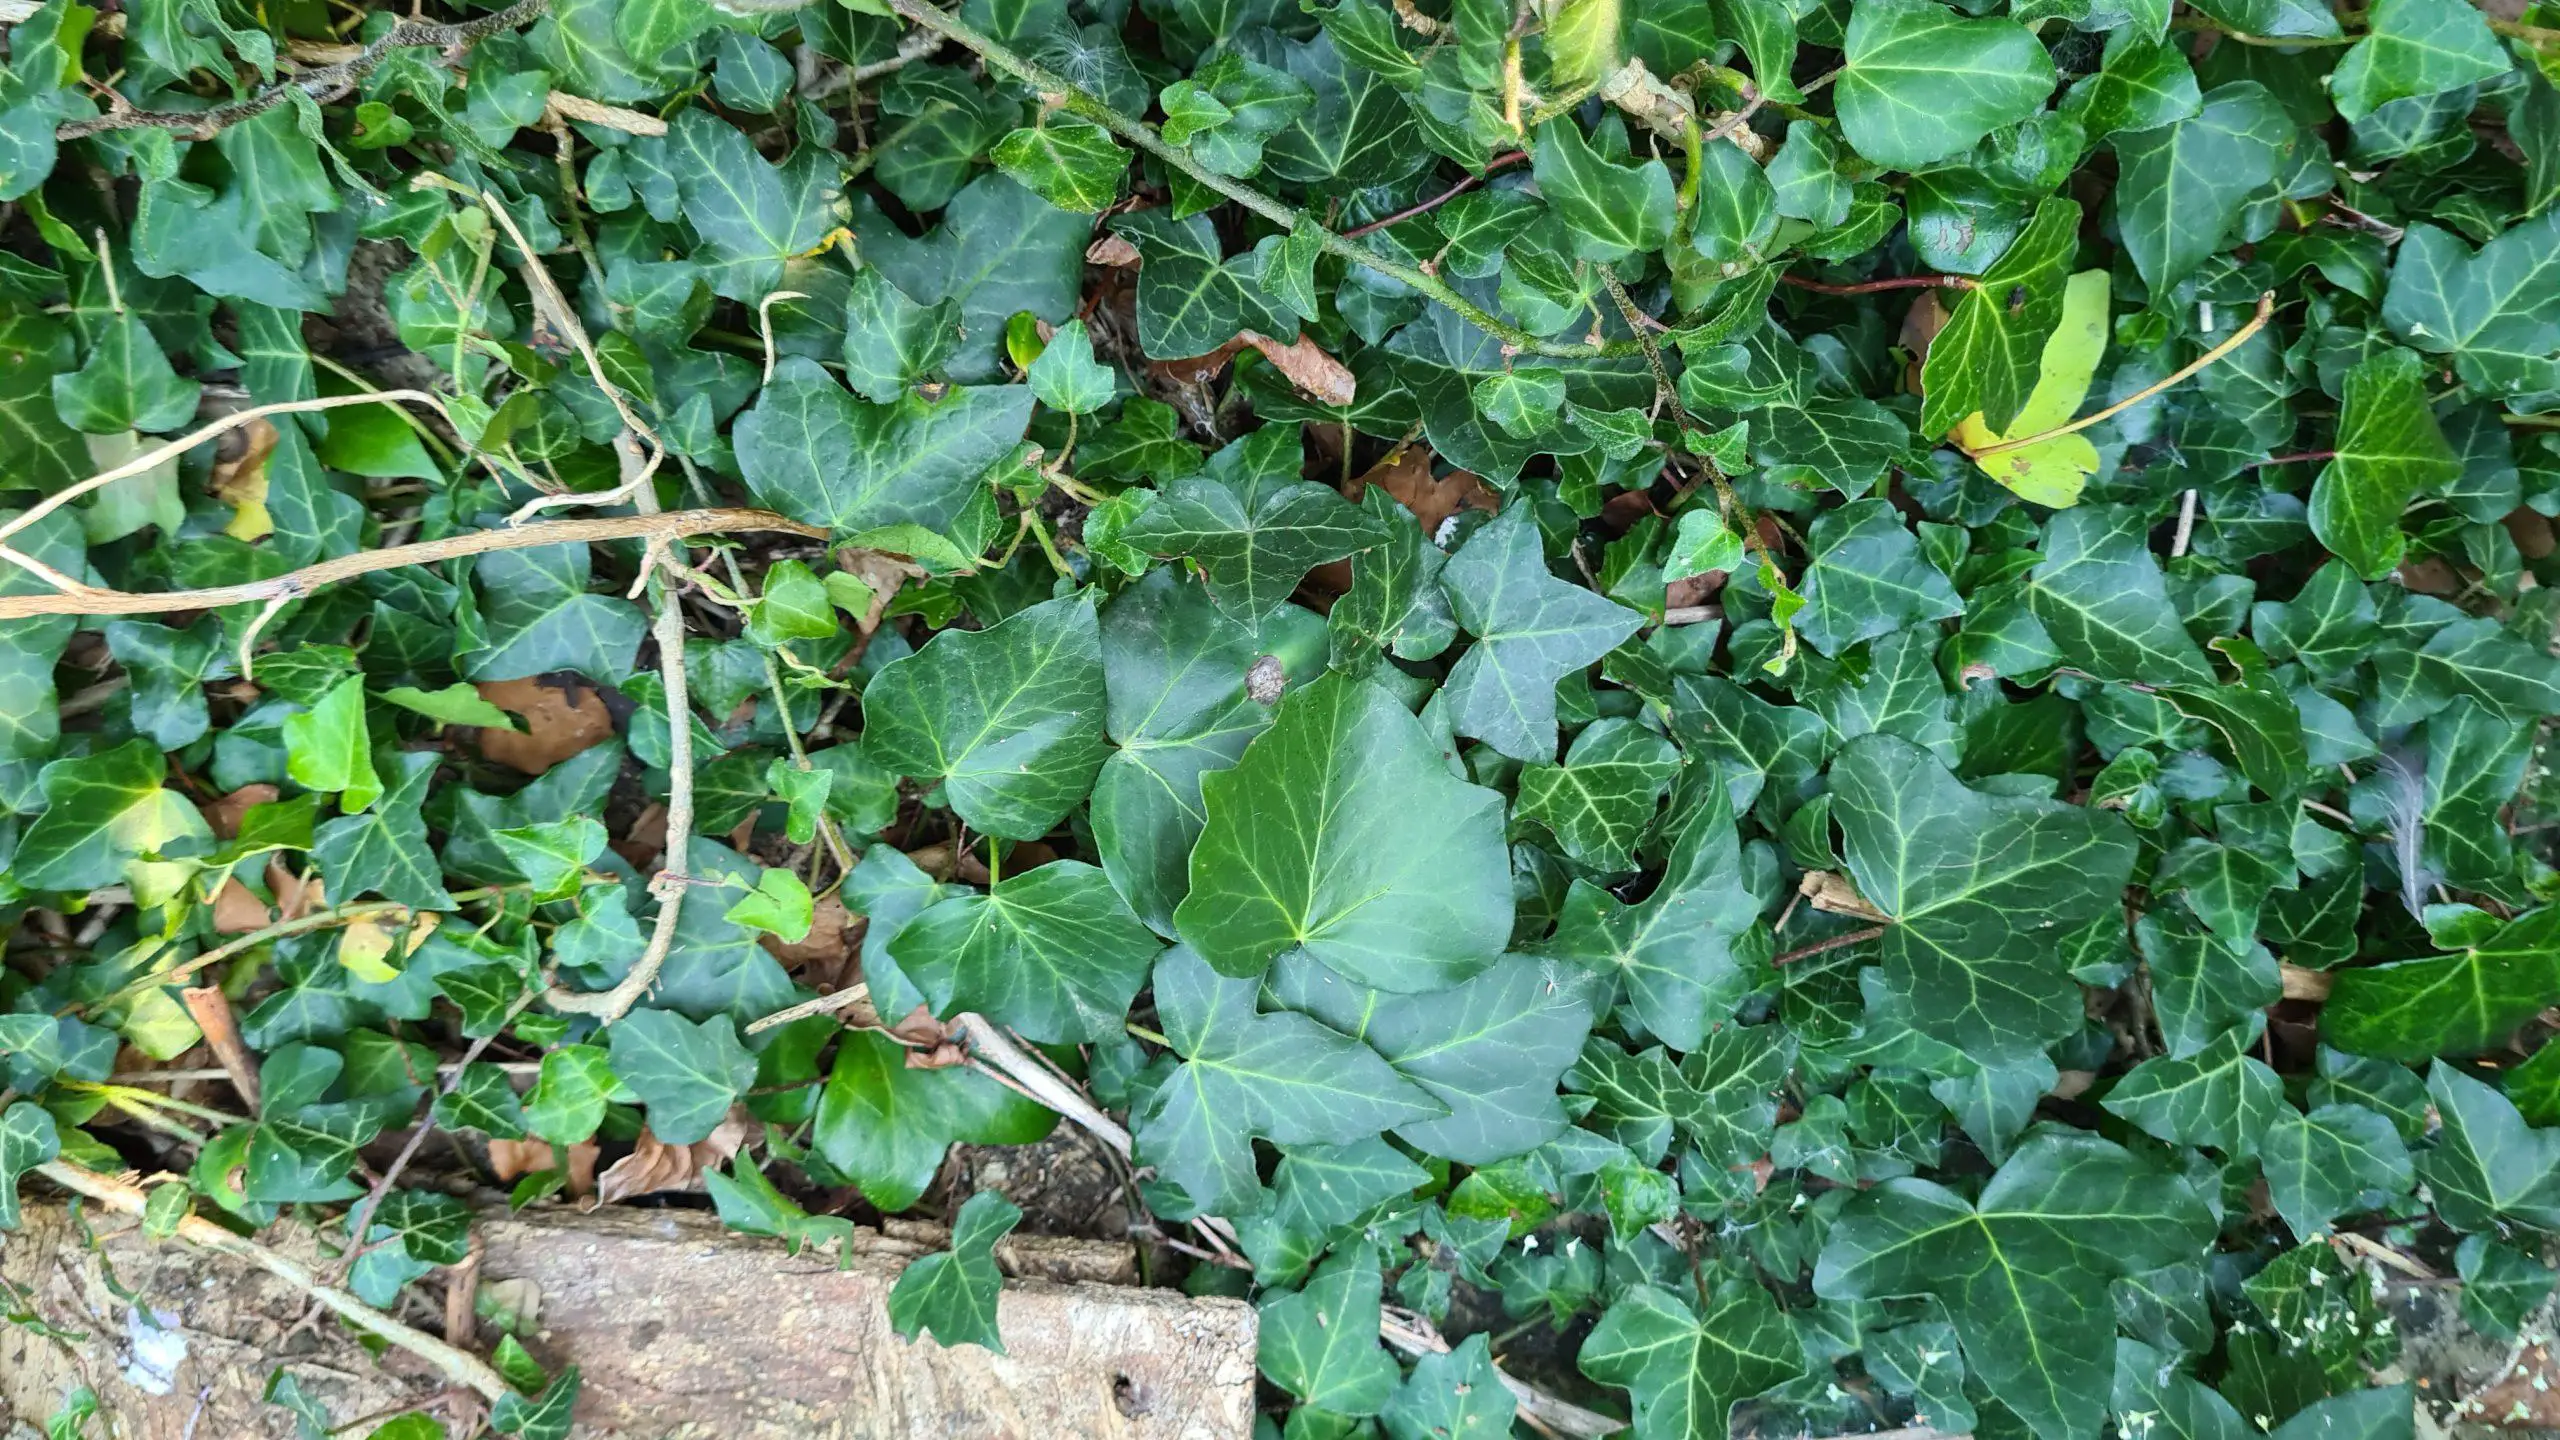 The dense foliage of English Ivy conceals anything it clings to